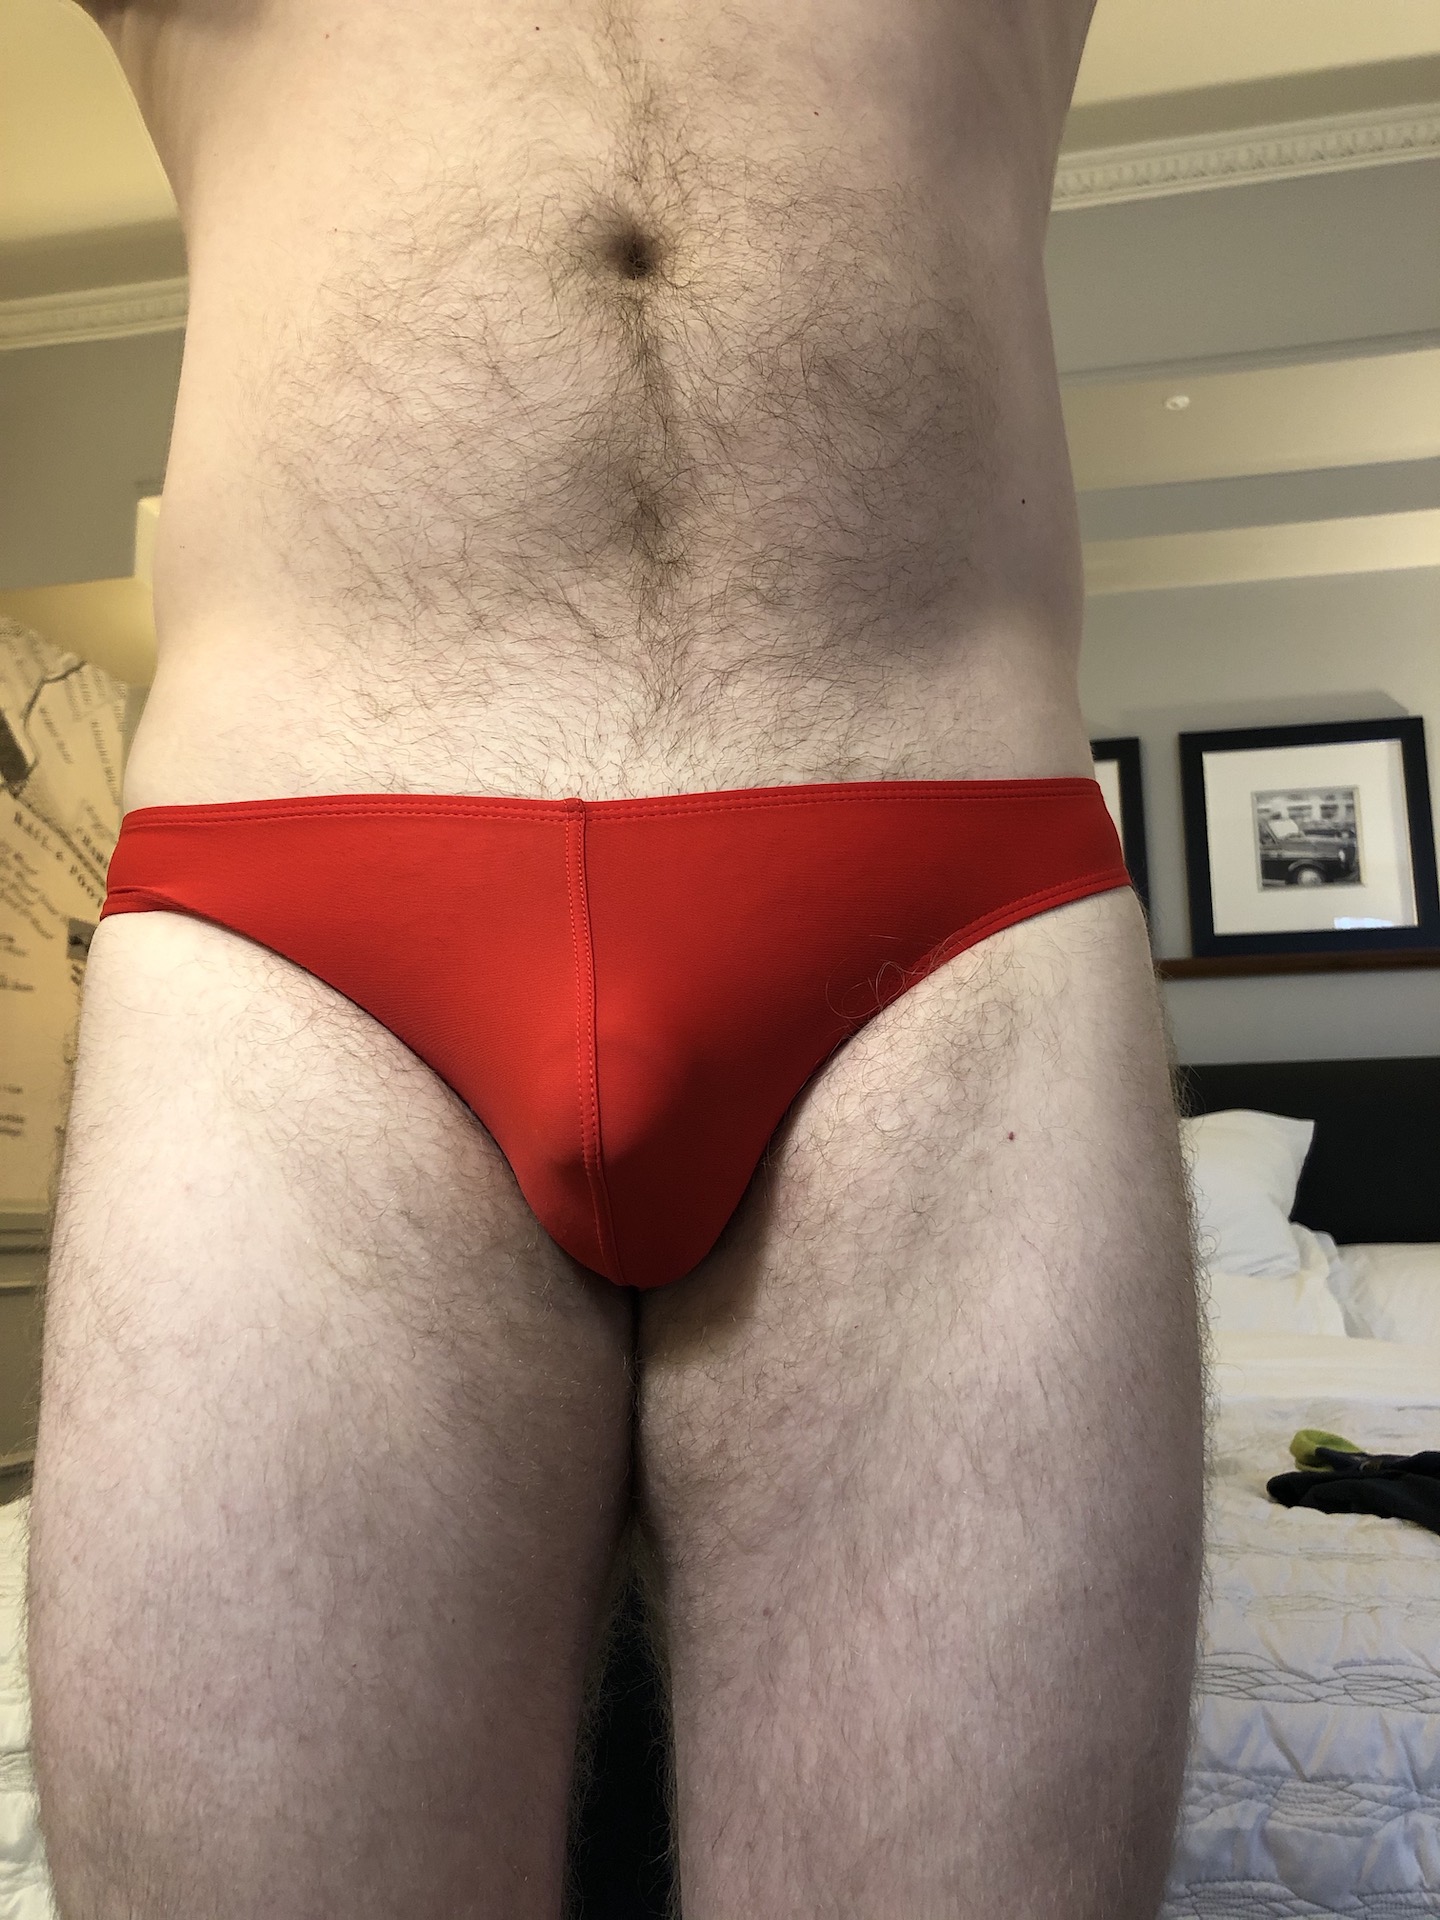 Plain and simple bright red bikinis today…